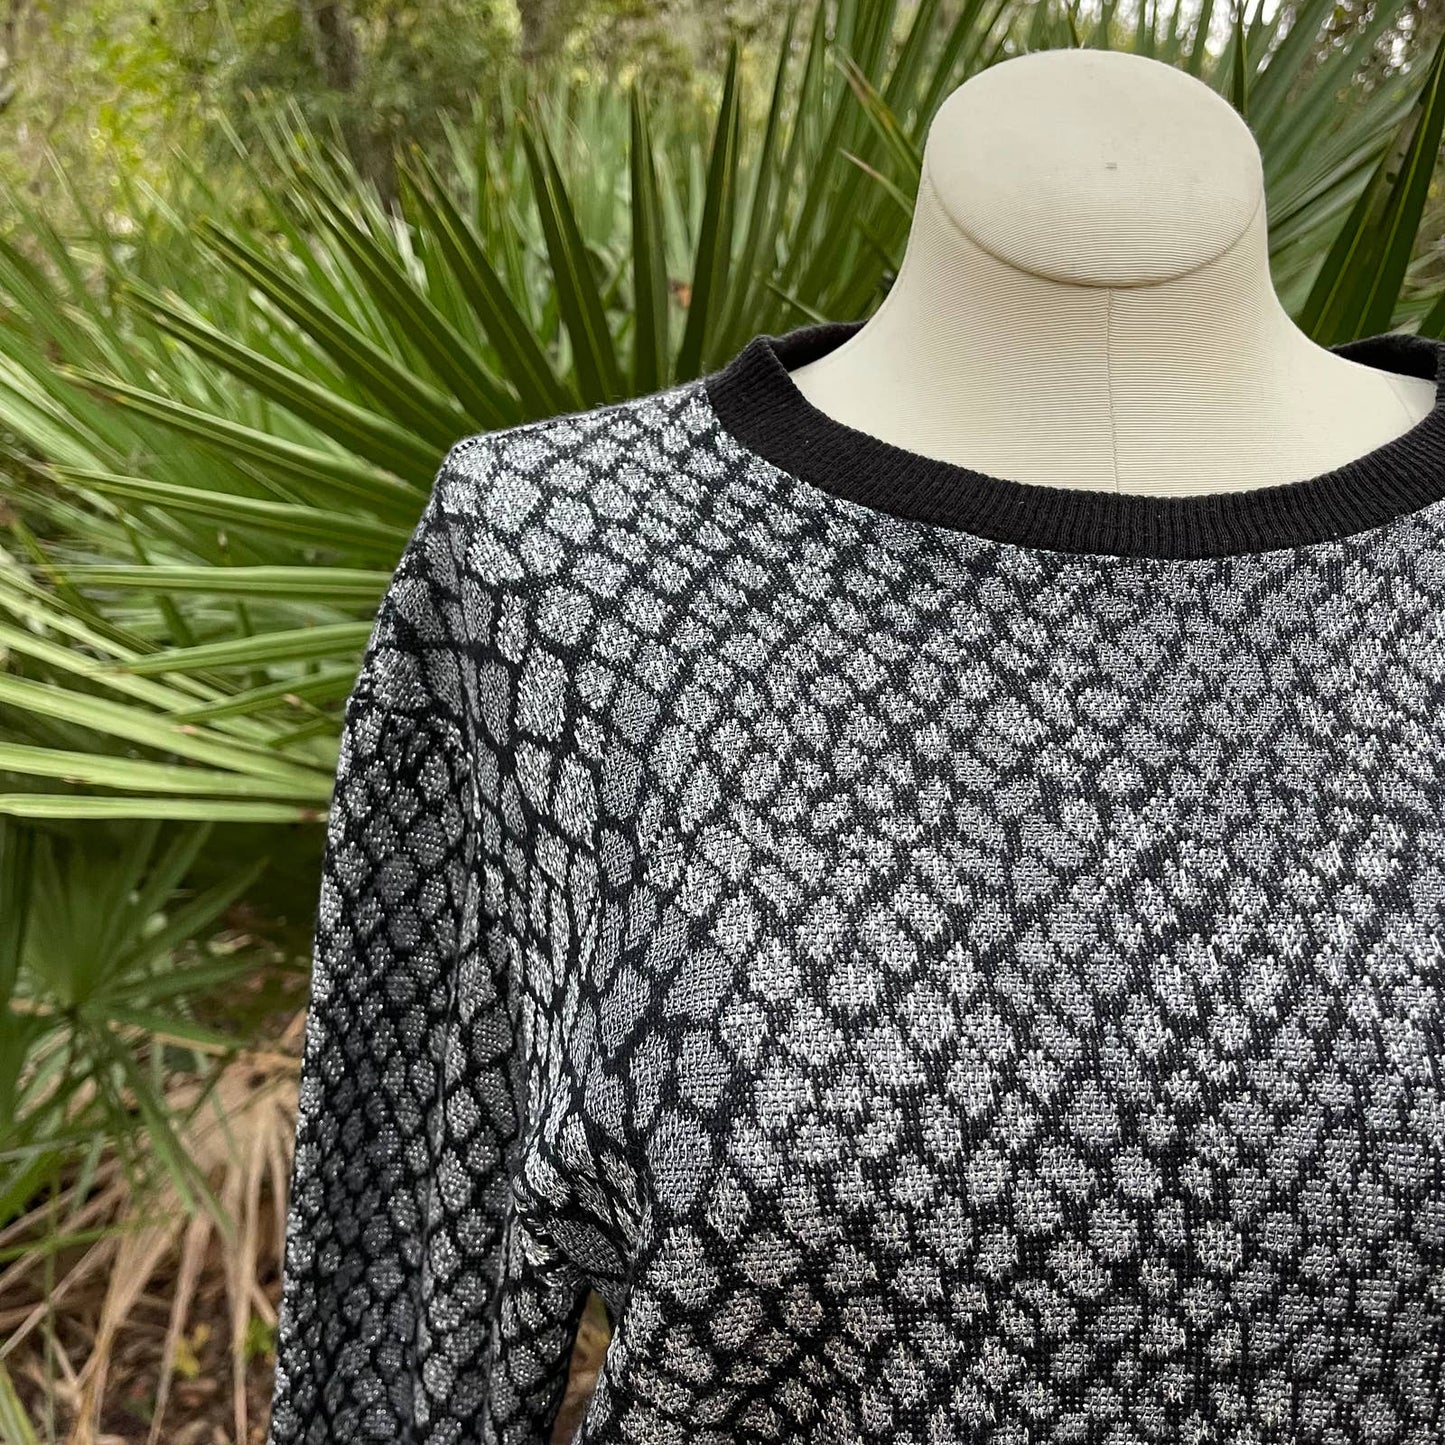 Vintage 90s Snake Print Sweater Black and Silver Lizard Land N Sea Size S M L